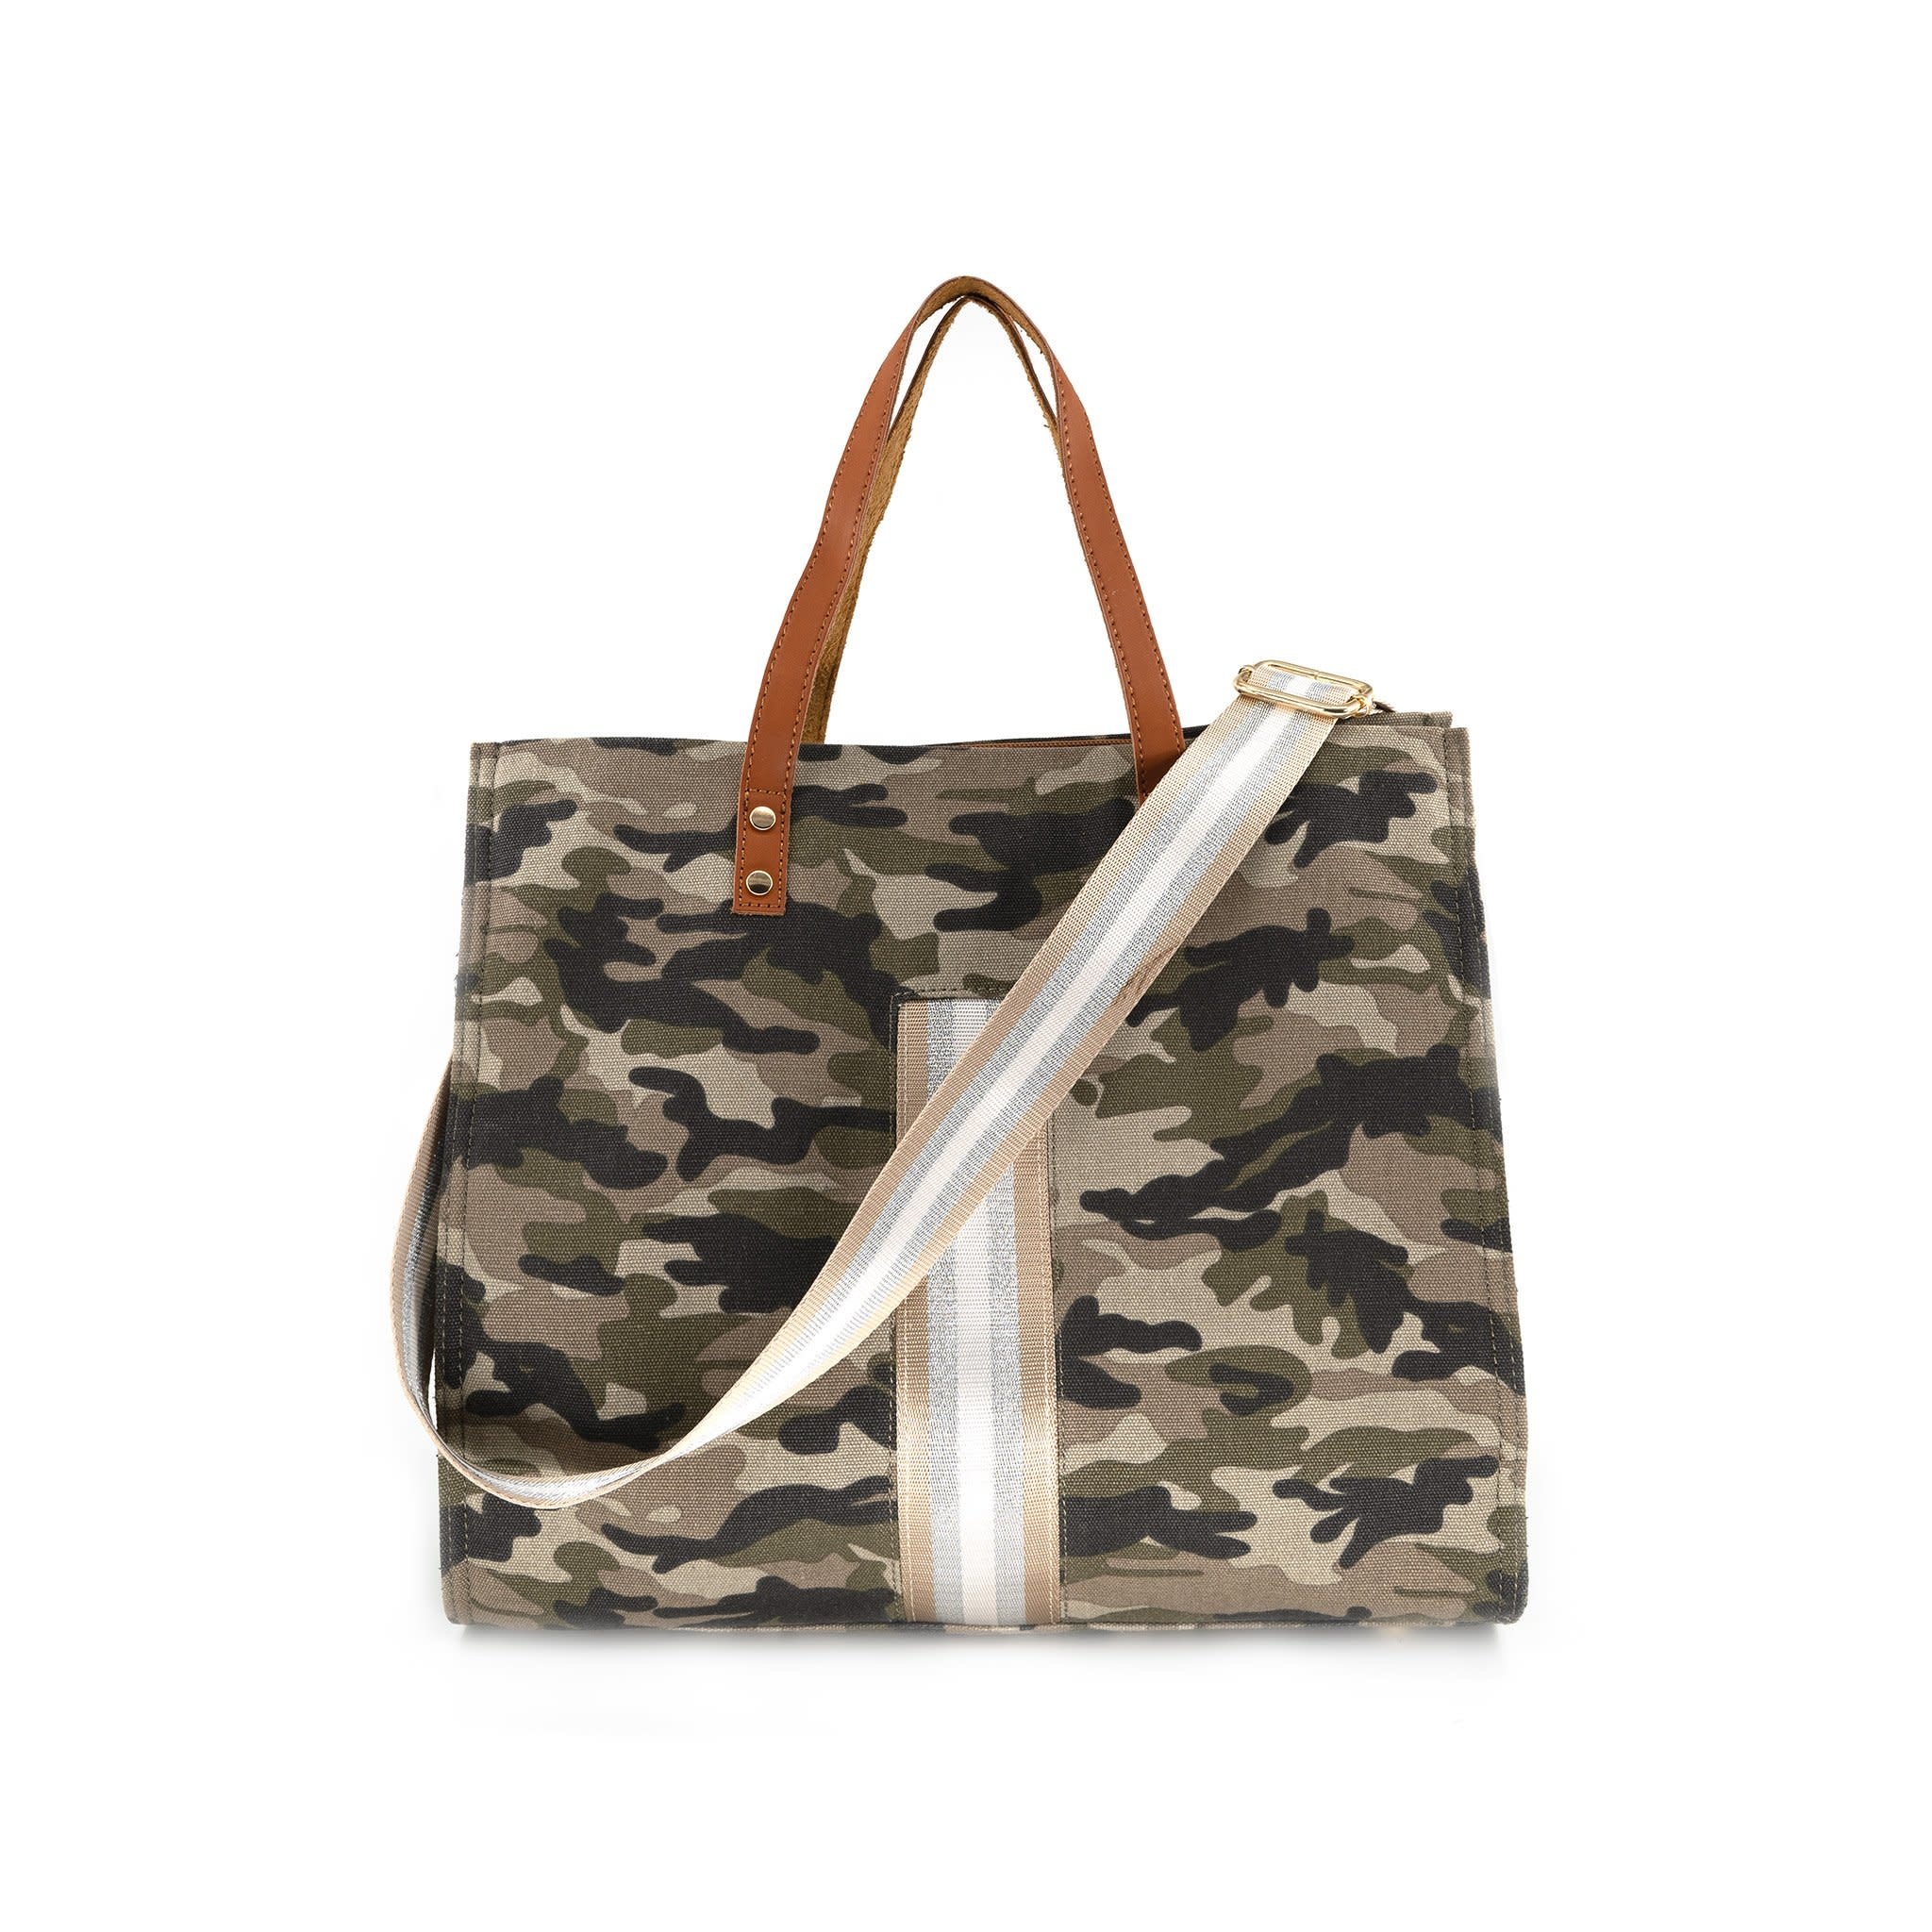 Khaki Camo Purse With Gold Stripe at Initial Styles Gift Boutique